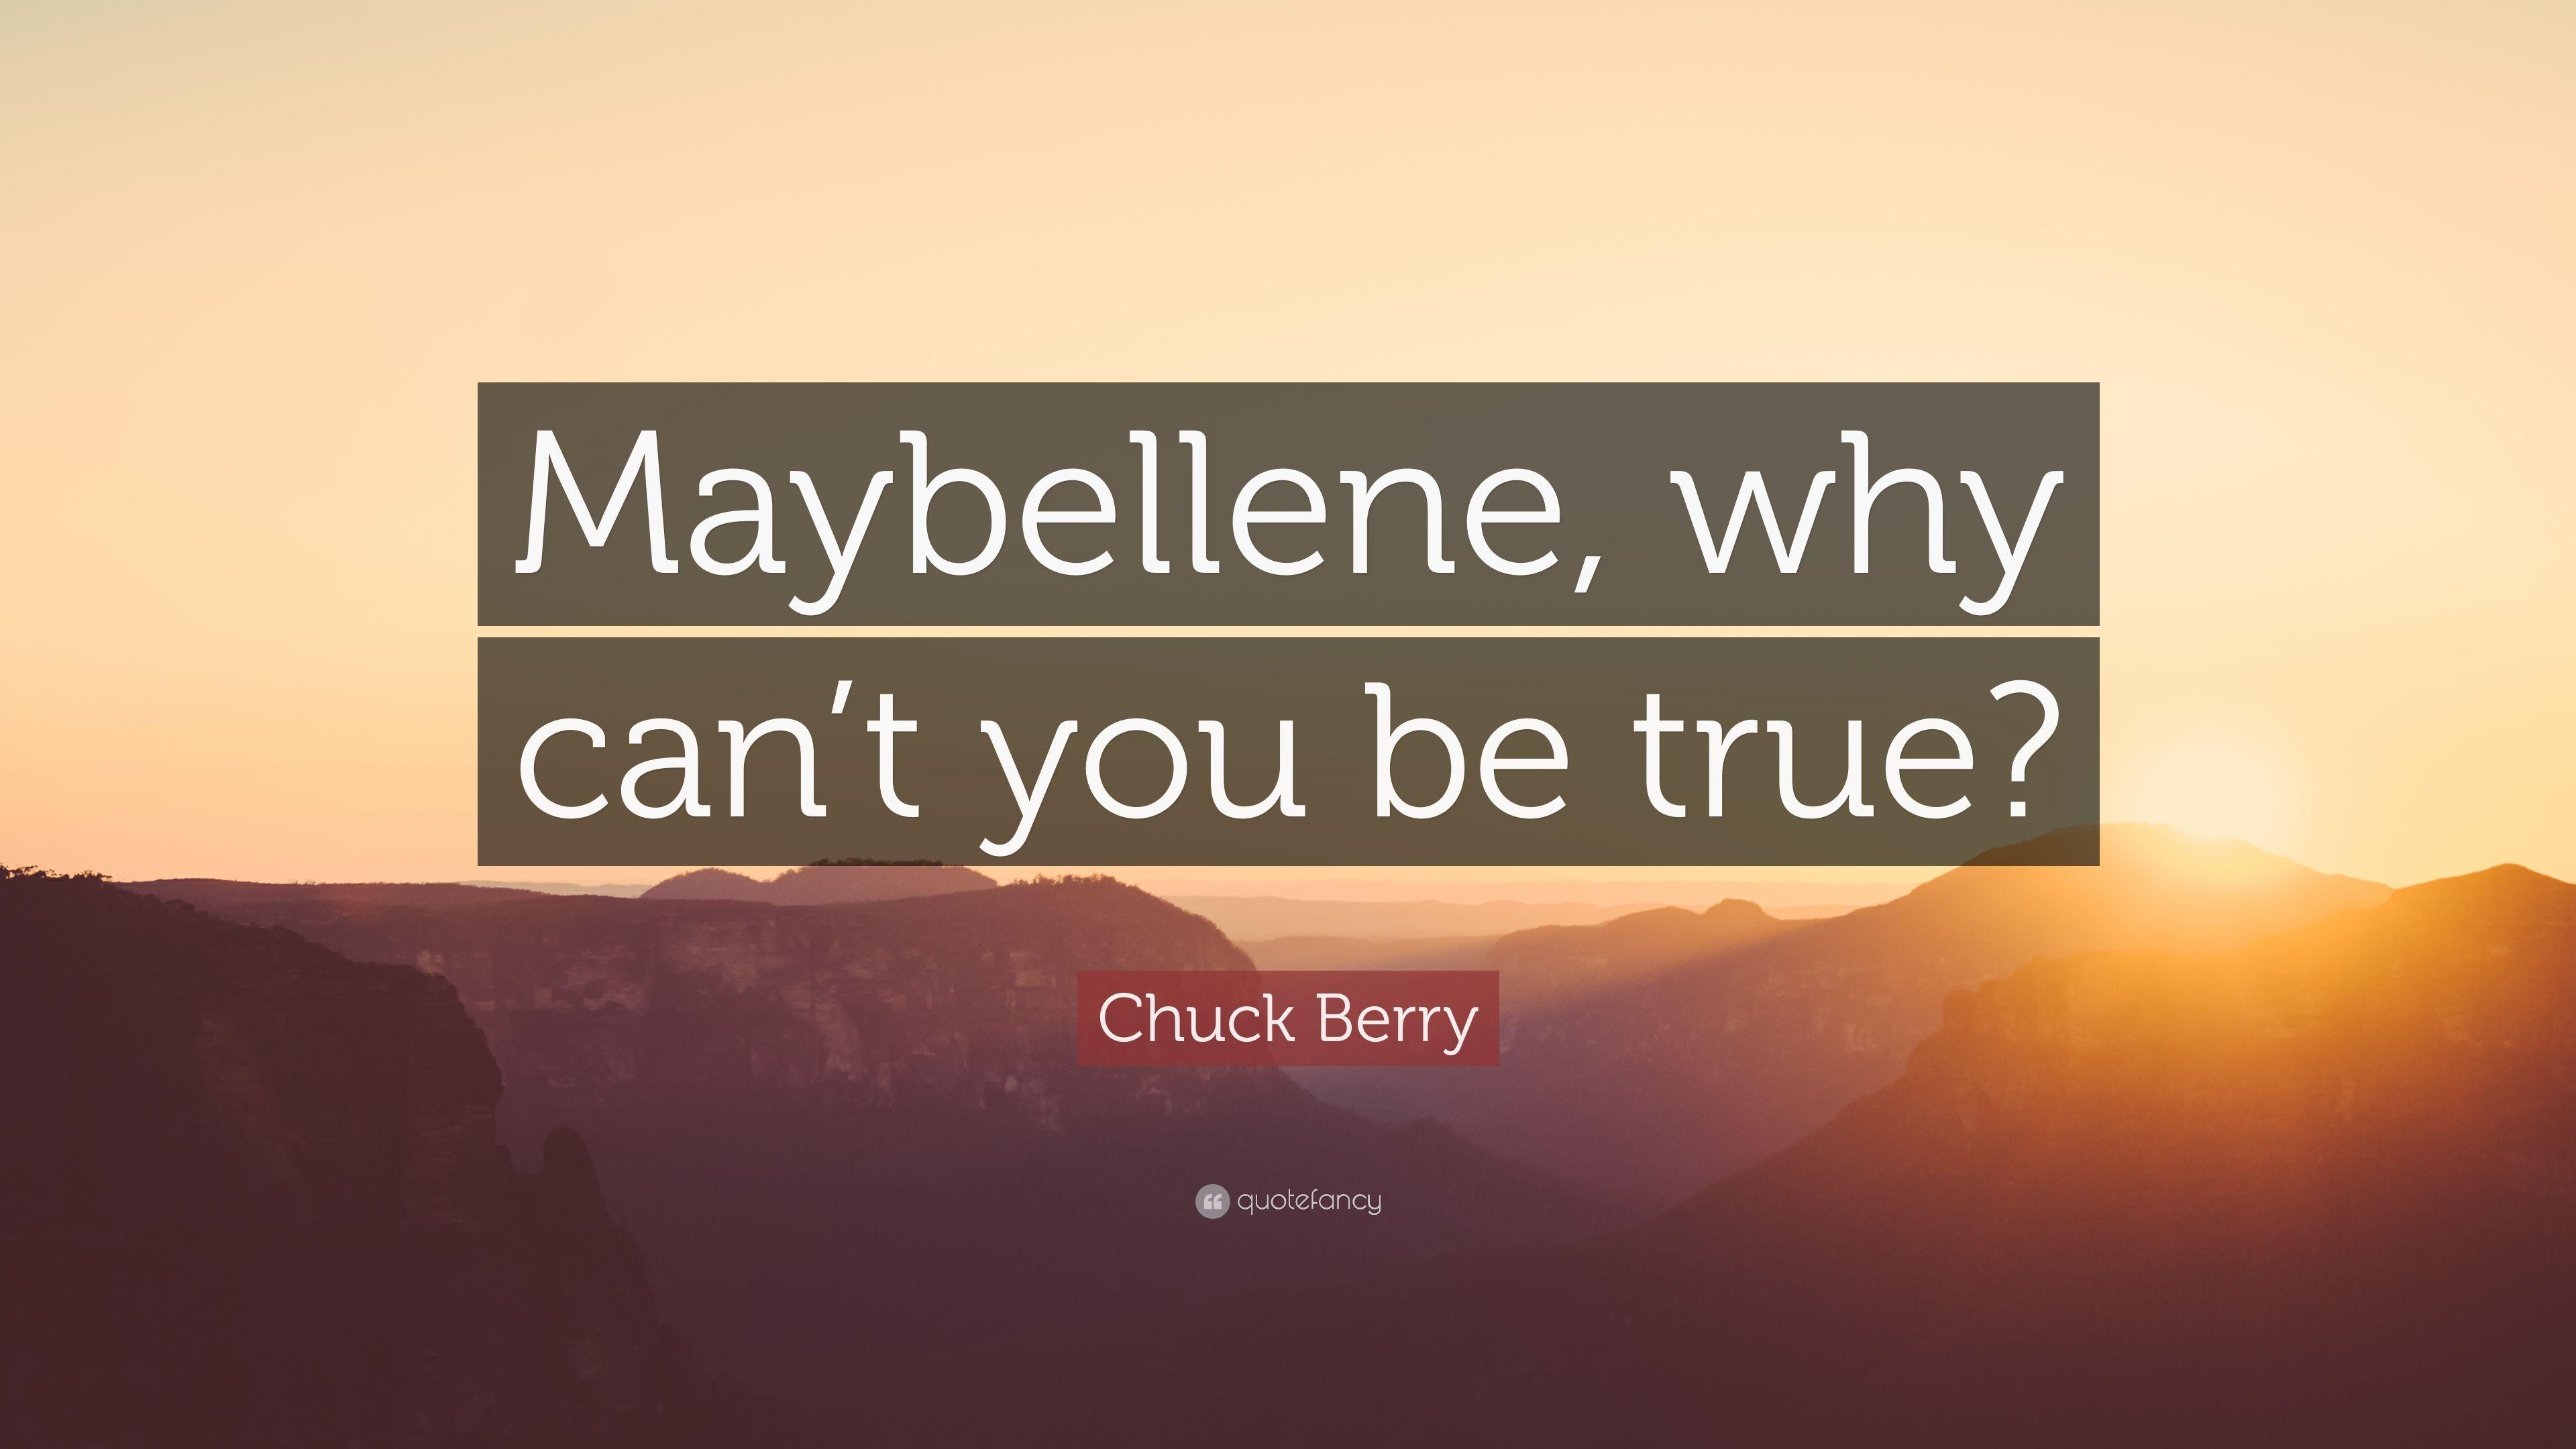 Chuck Berry Quote: “Maybellene, why can't you be true?” 7